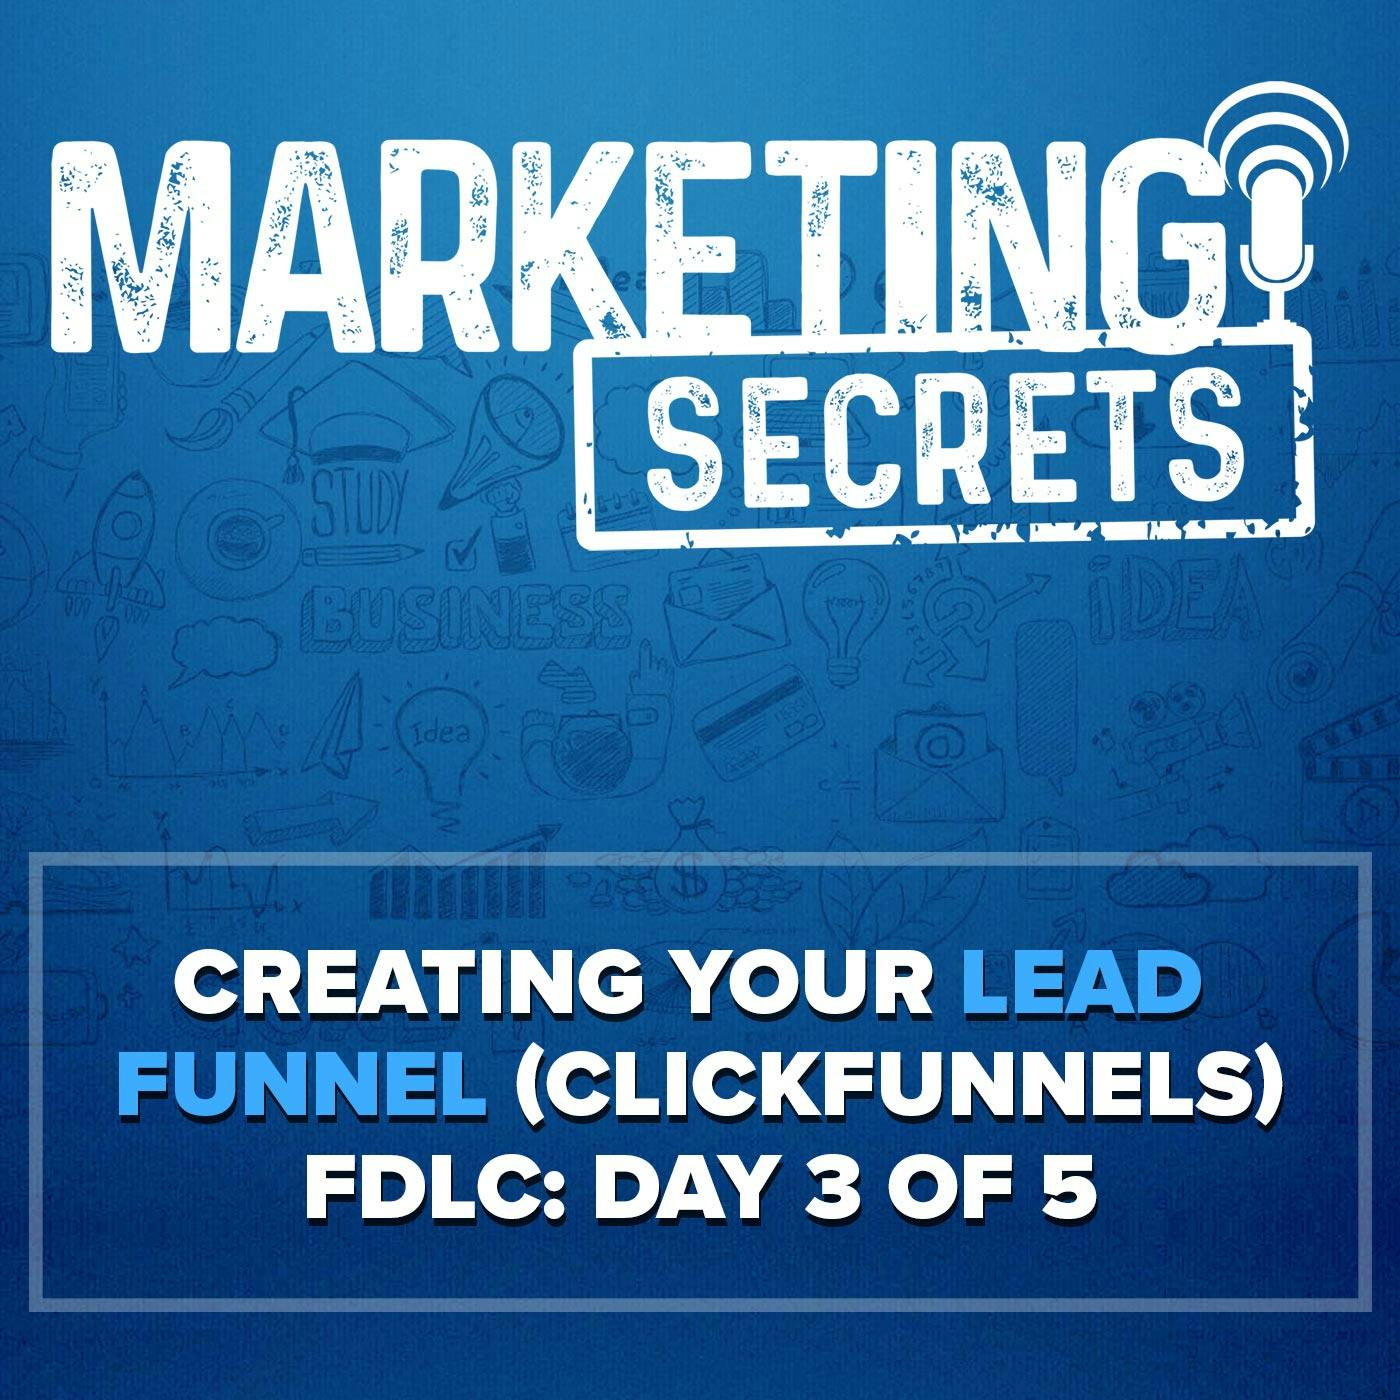 Creating Your Lead Funnel (ClickFunnels) - FDLC: Day 3 of 5